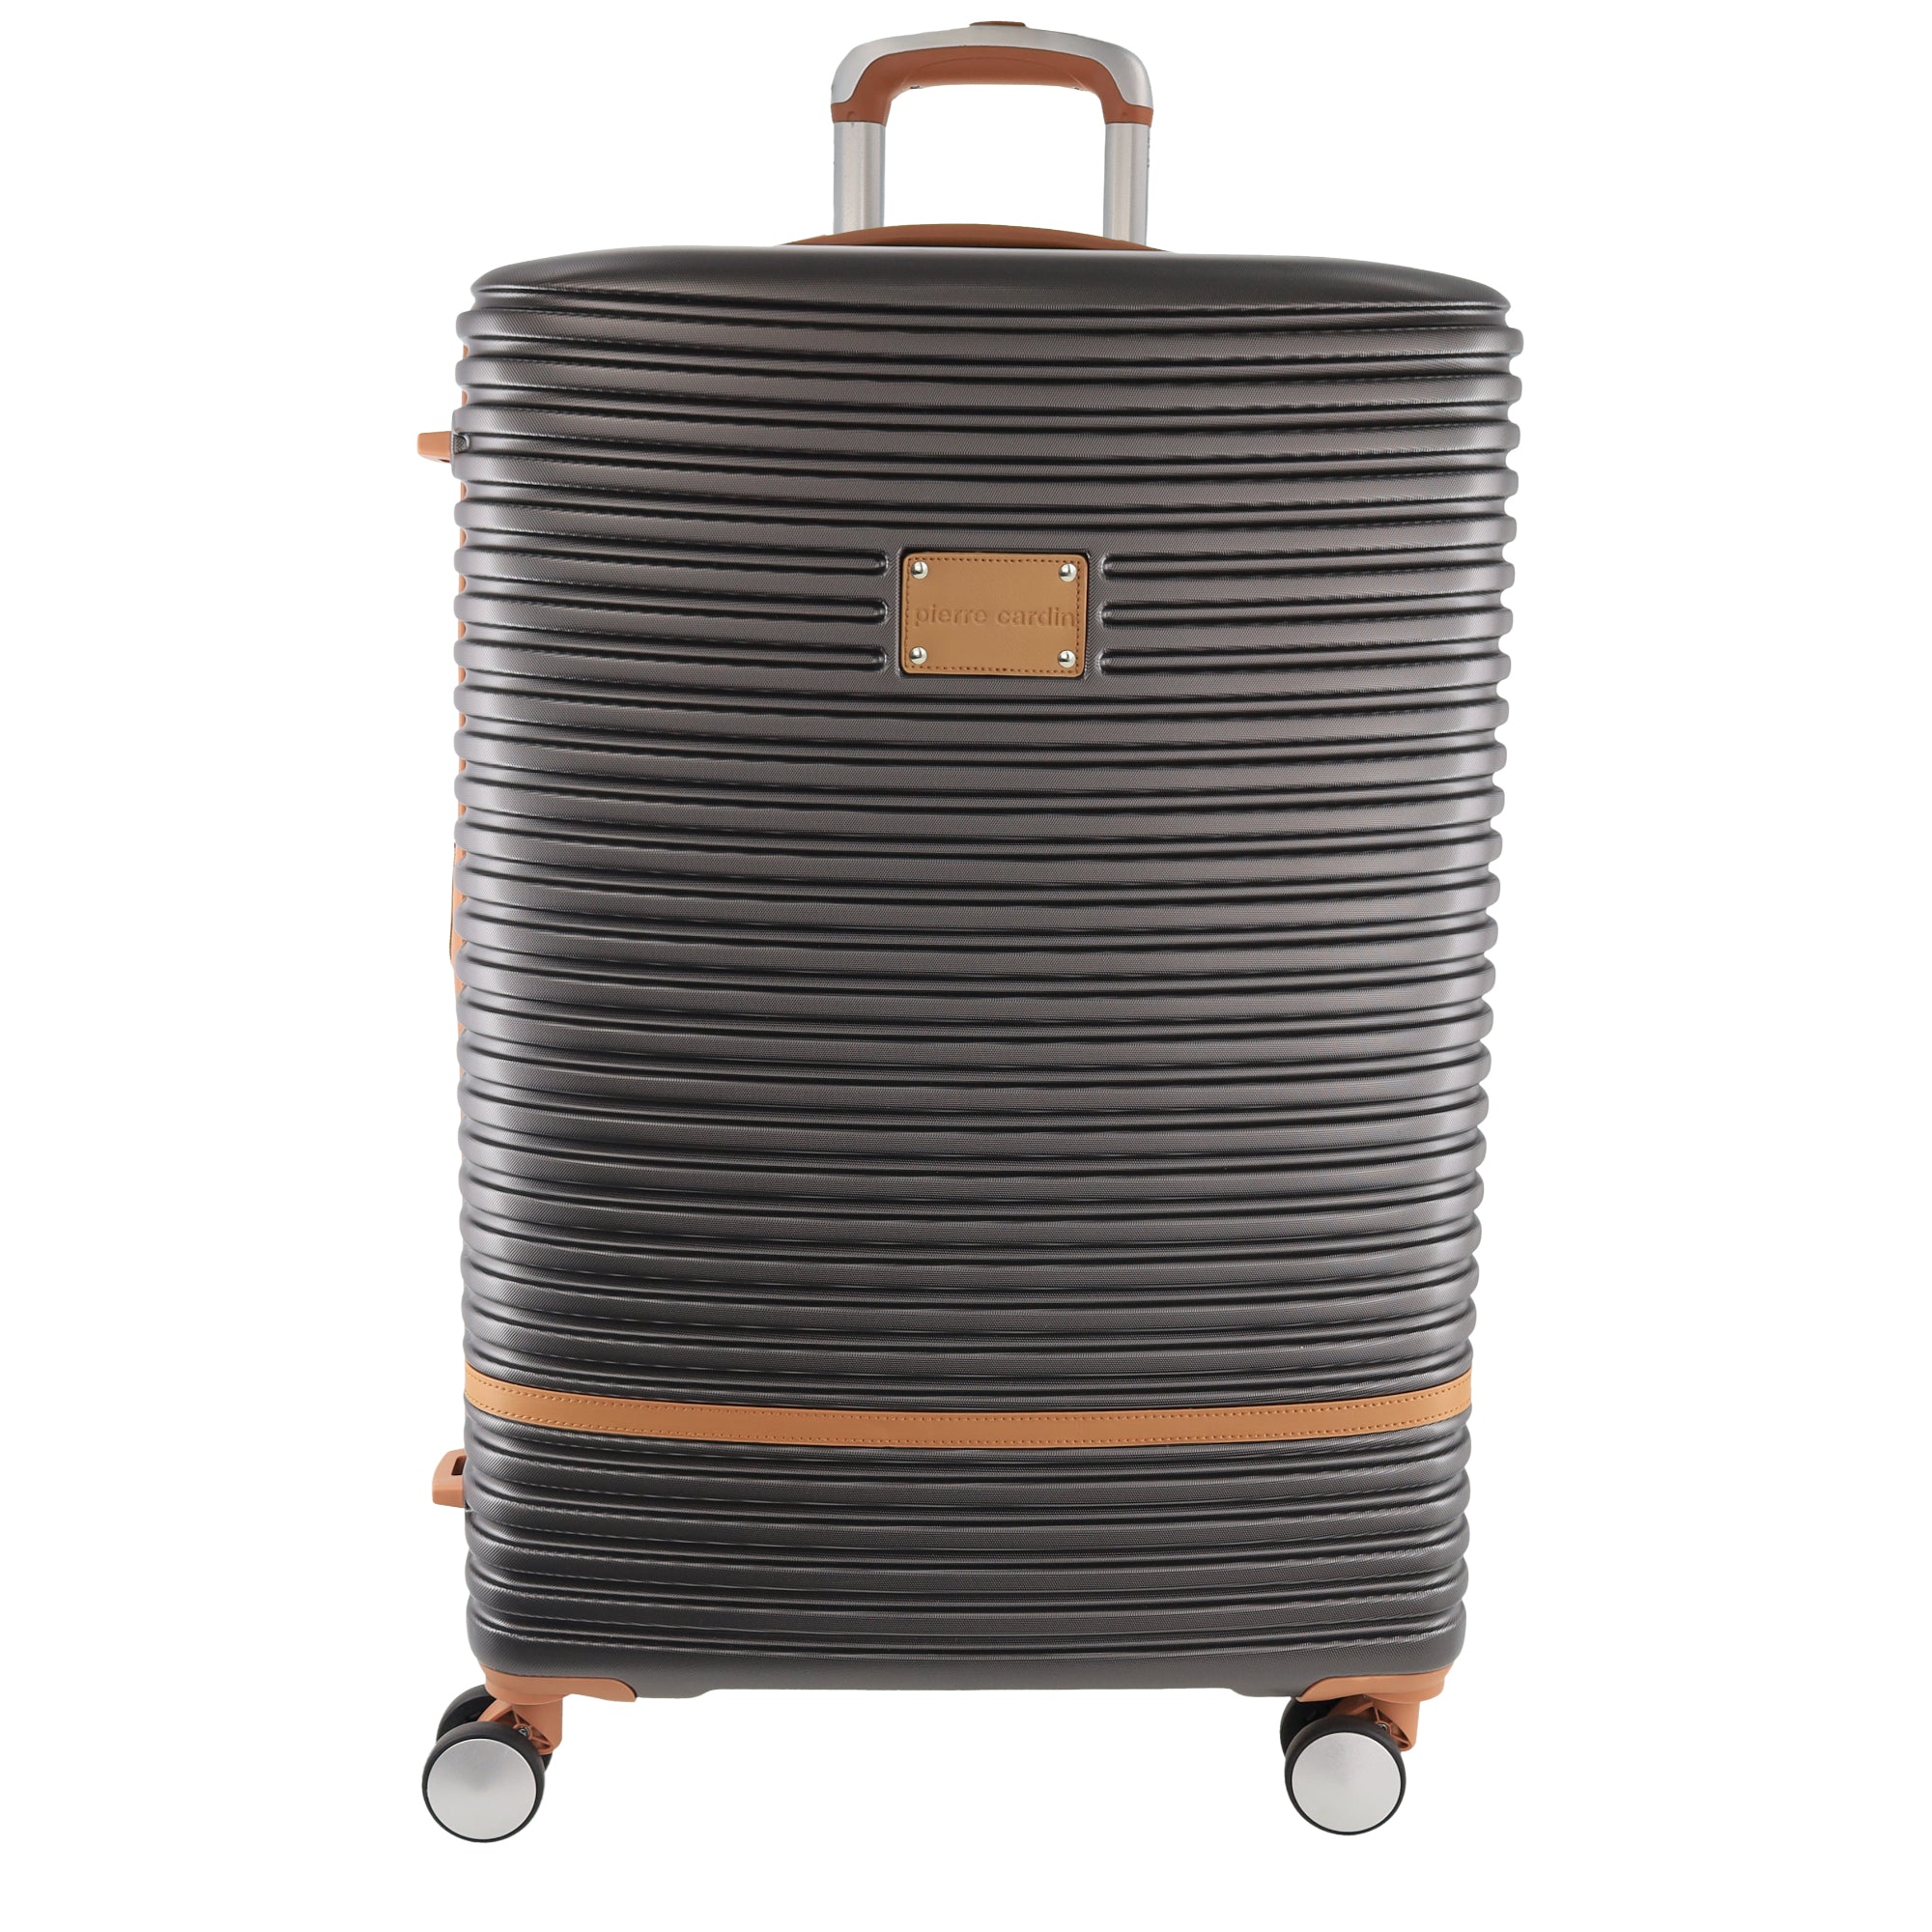 Pierre Cardin 70cm MEDIUM Hard Shell Suitcase in Charcoal